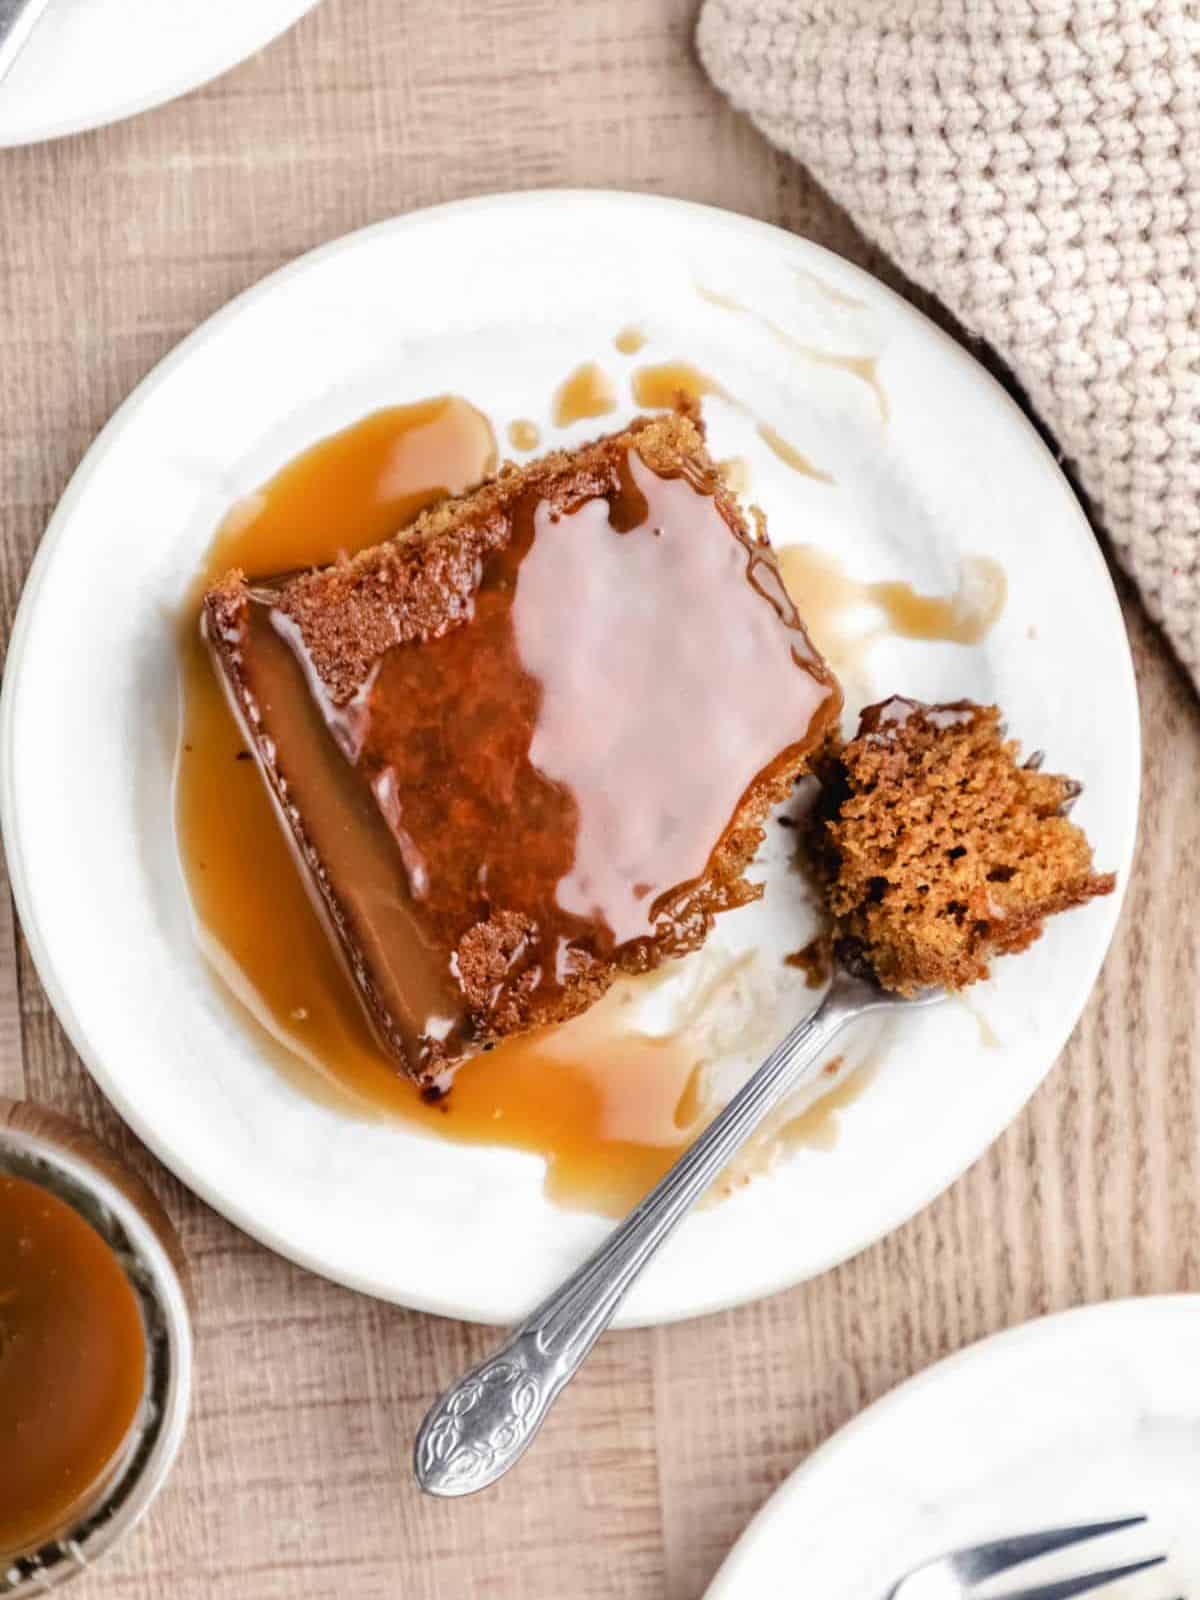 a delicious sticky toffee pudding cake, showcasing moist layers filled with dates and drizzled with caramel sauce.